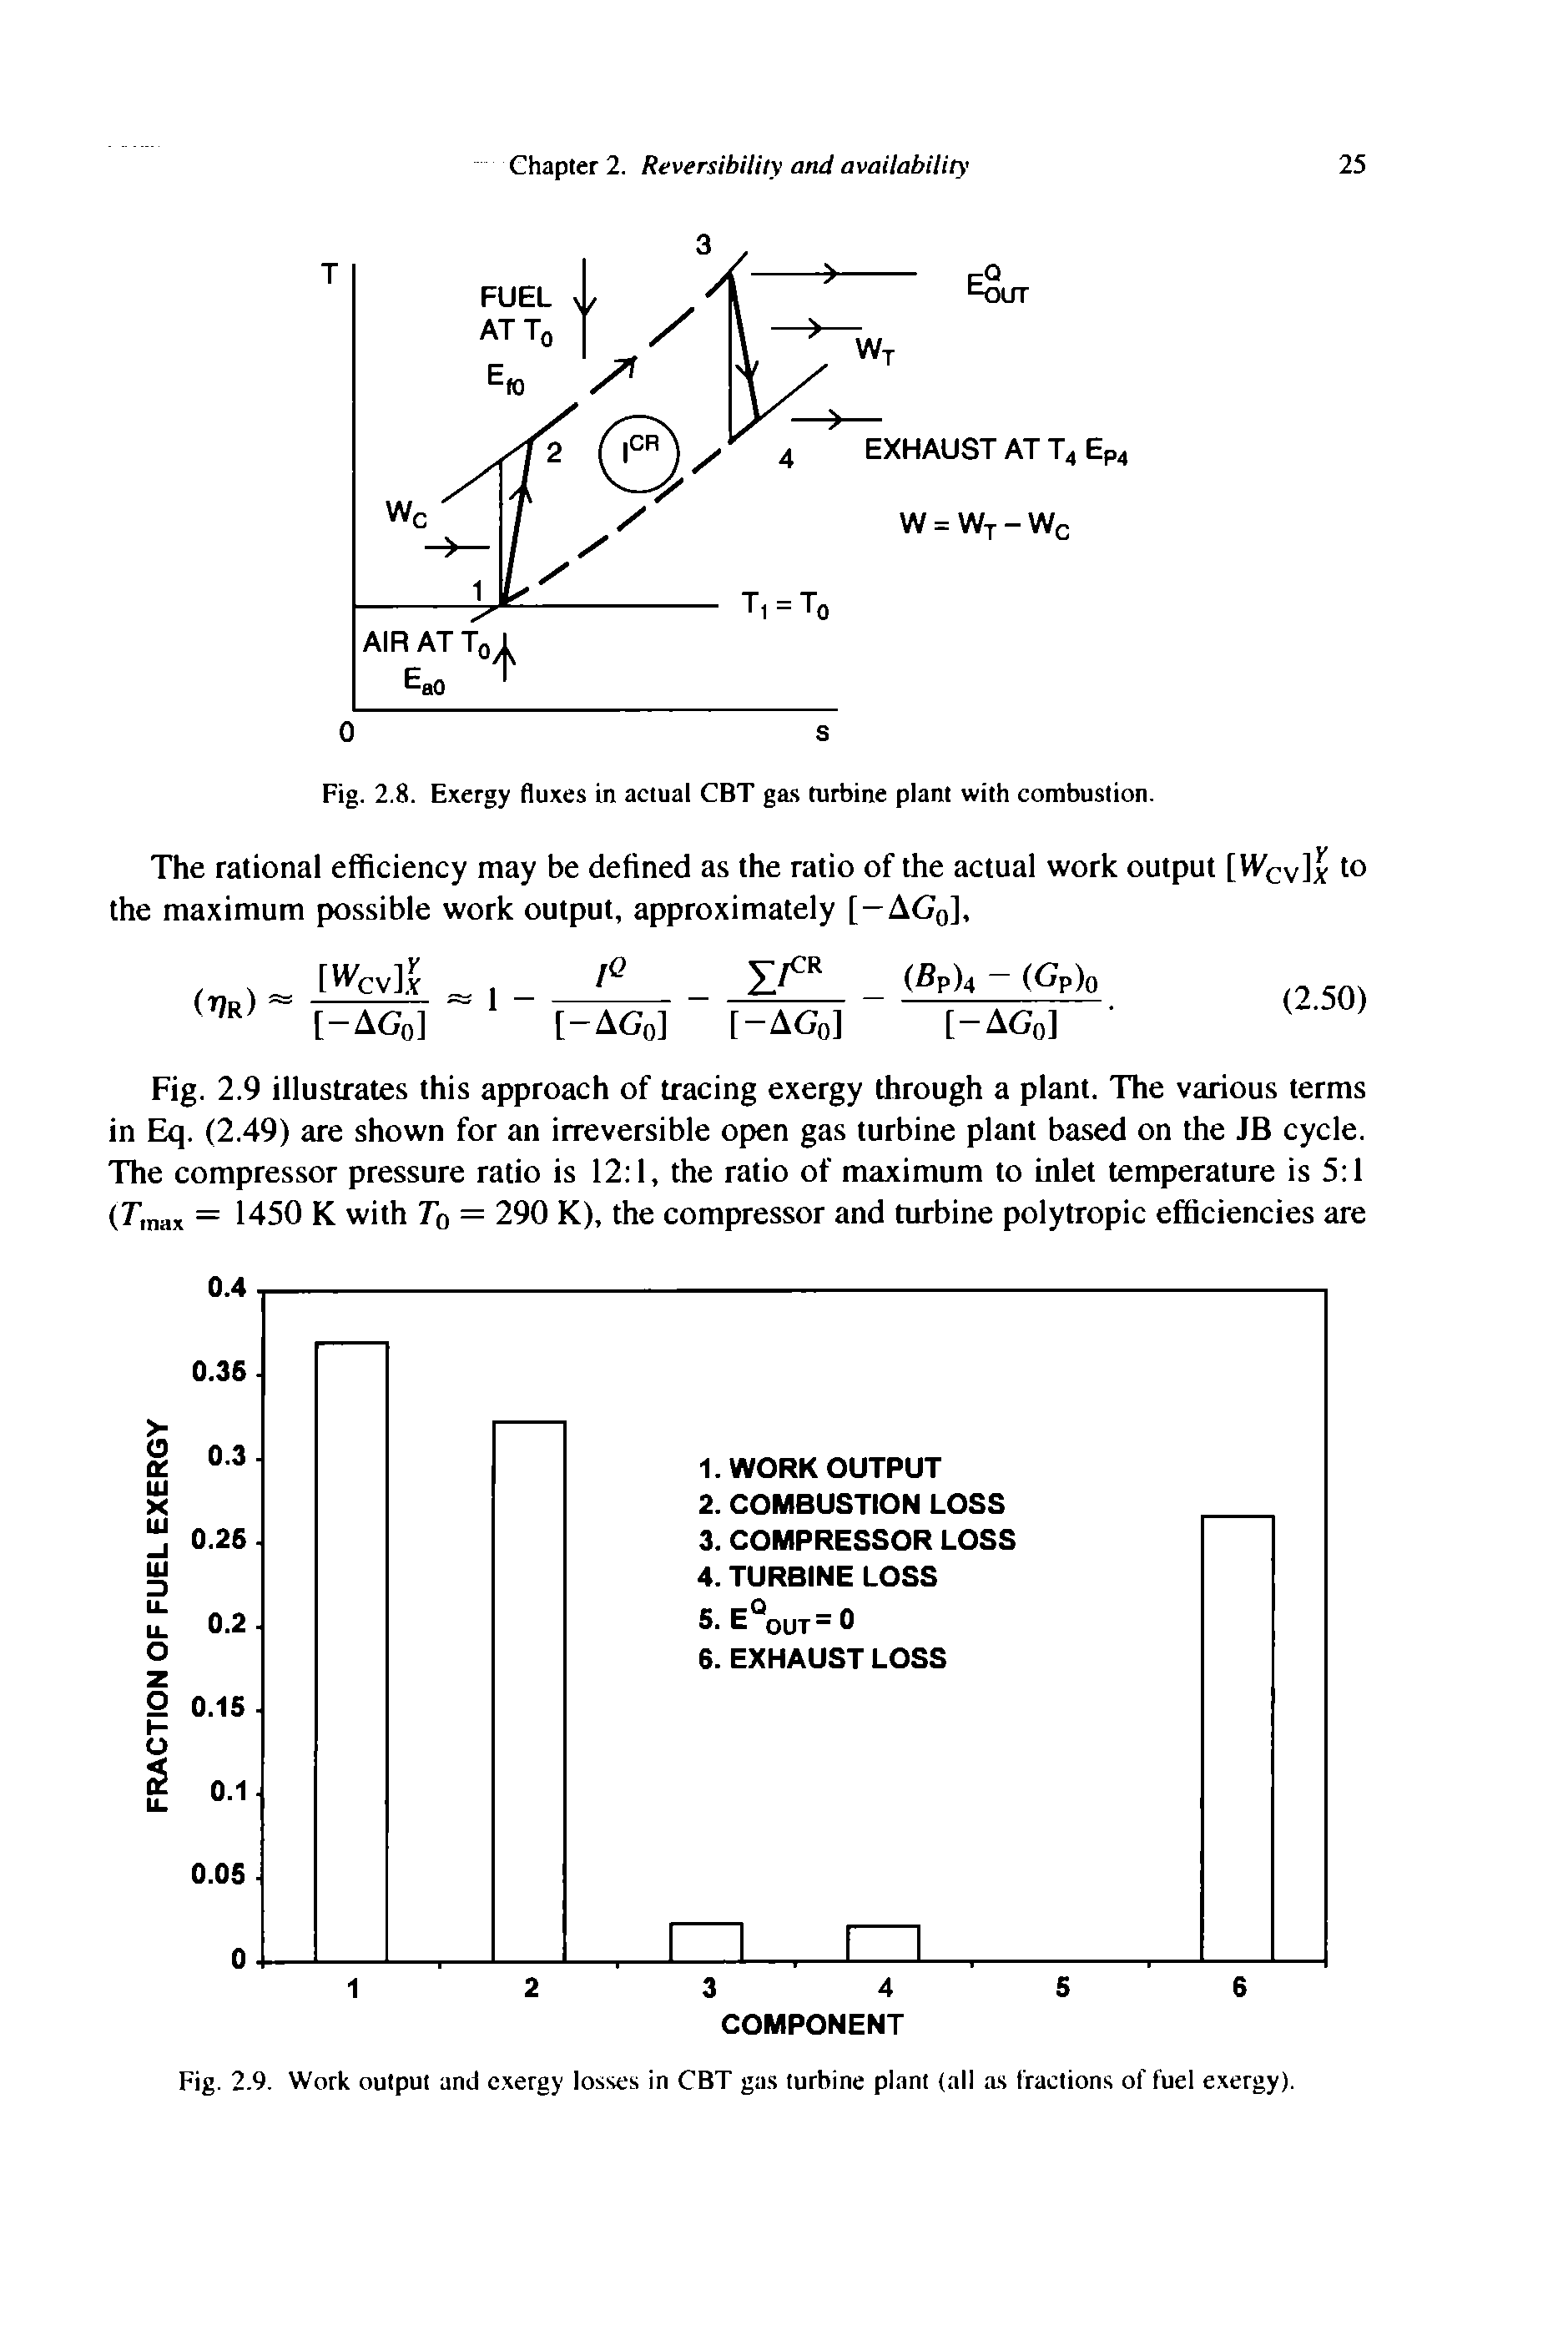 Fig. 2.8. Exergy fluxes in actual CBT ga.s turbine plant with combustion.